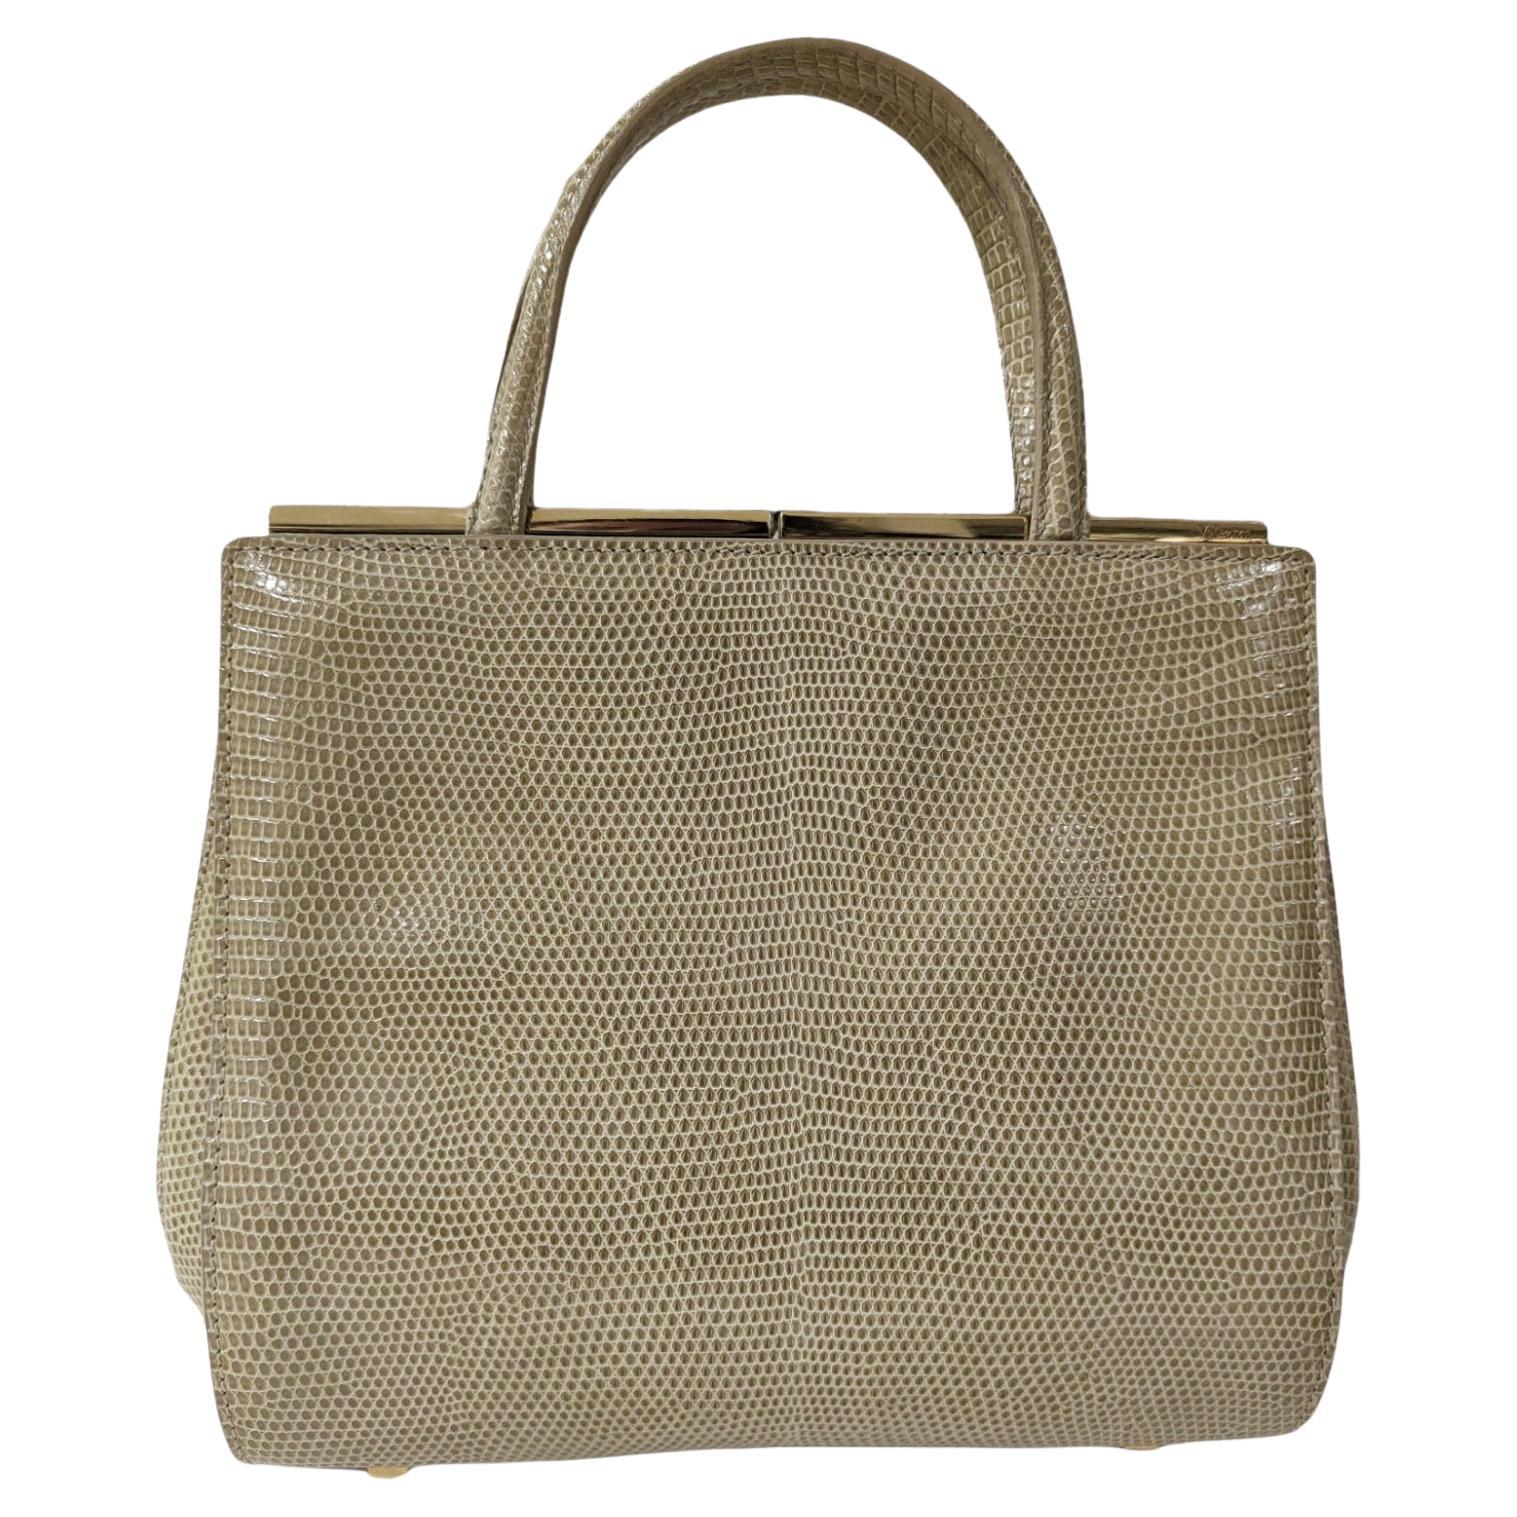 Valextra reptile beige leather handle bag